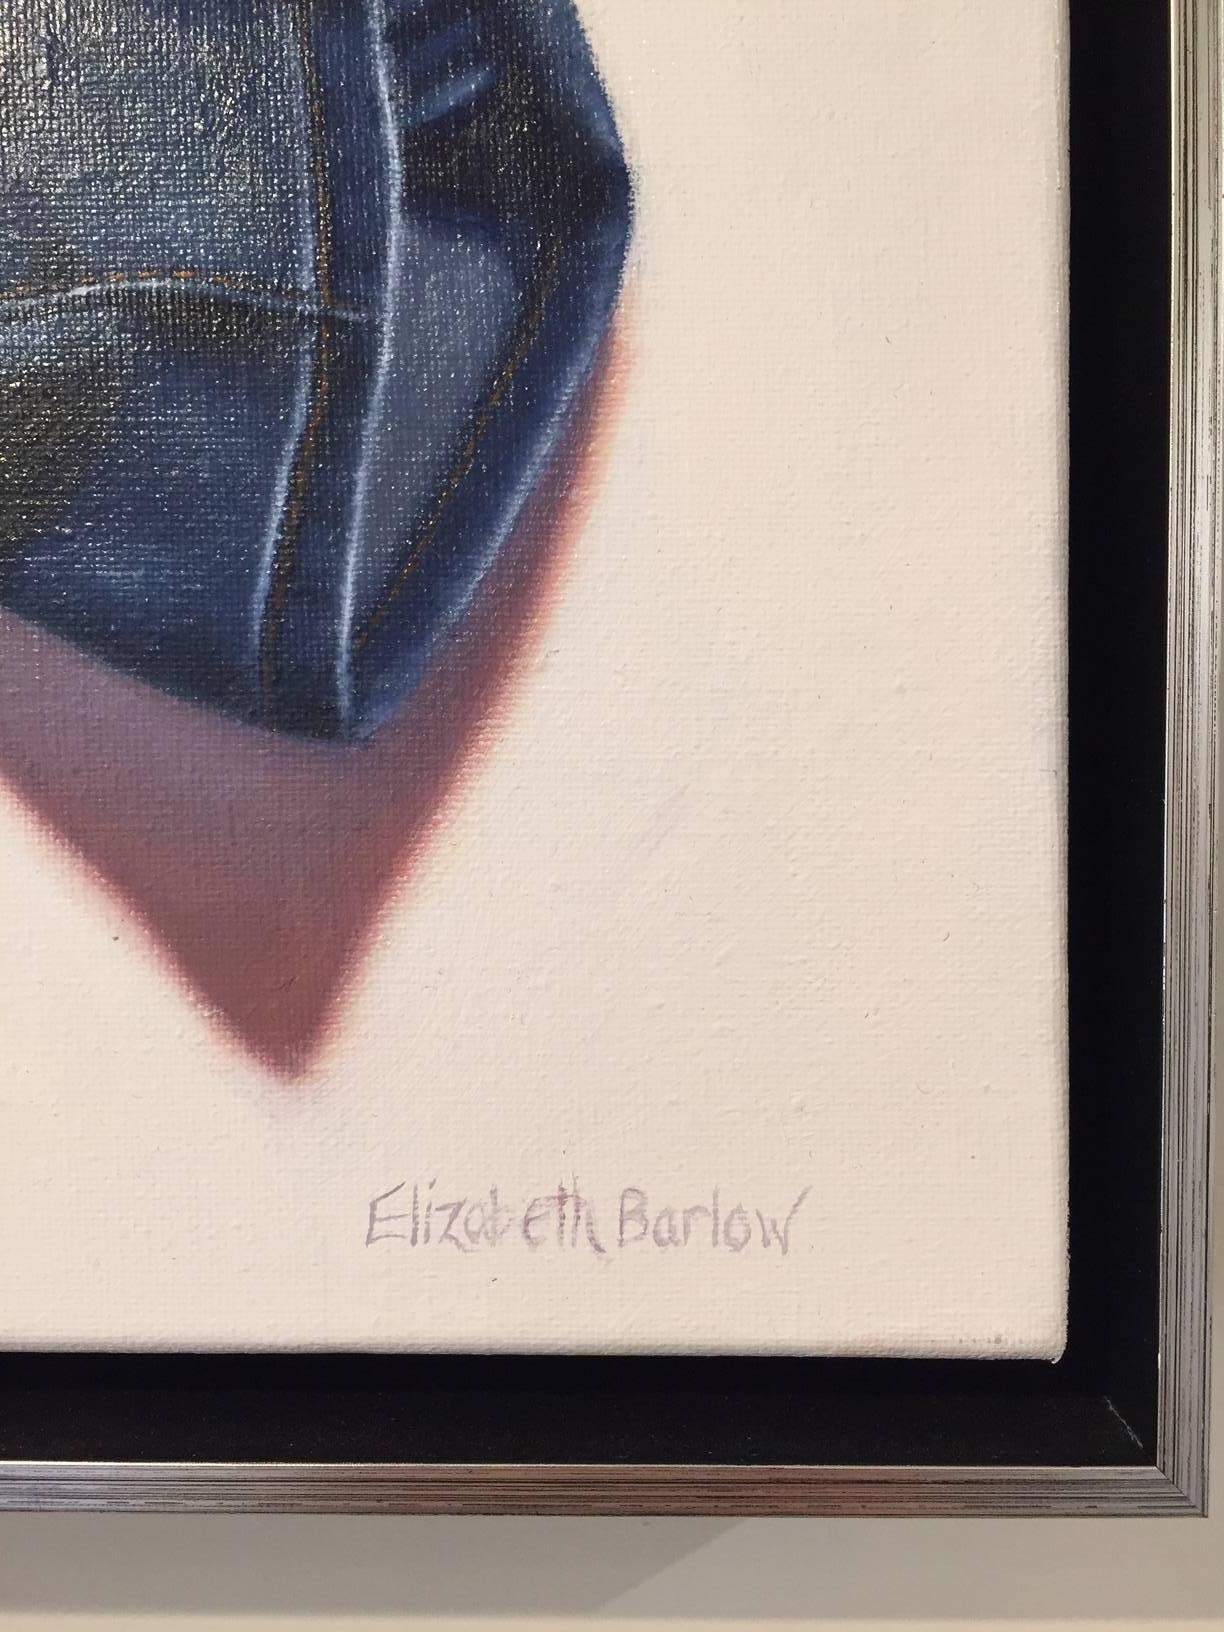 A pair of entwined blue jeans in a contemporary still life "Portrait in Absentia" are featured in this important oil painting by American artist Elizabeth Barlow, who works in the spirit of the great portraiture tradition, but deviates